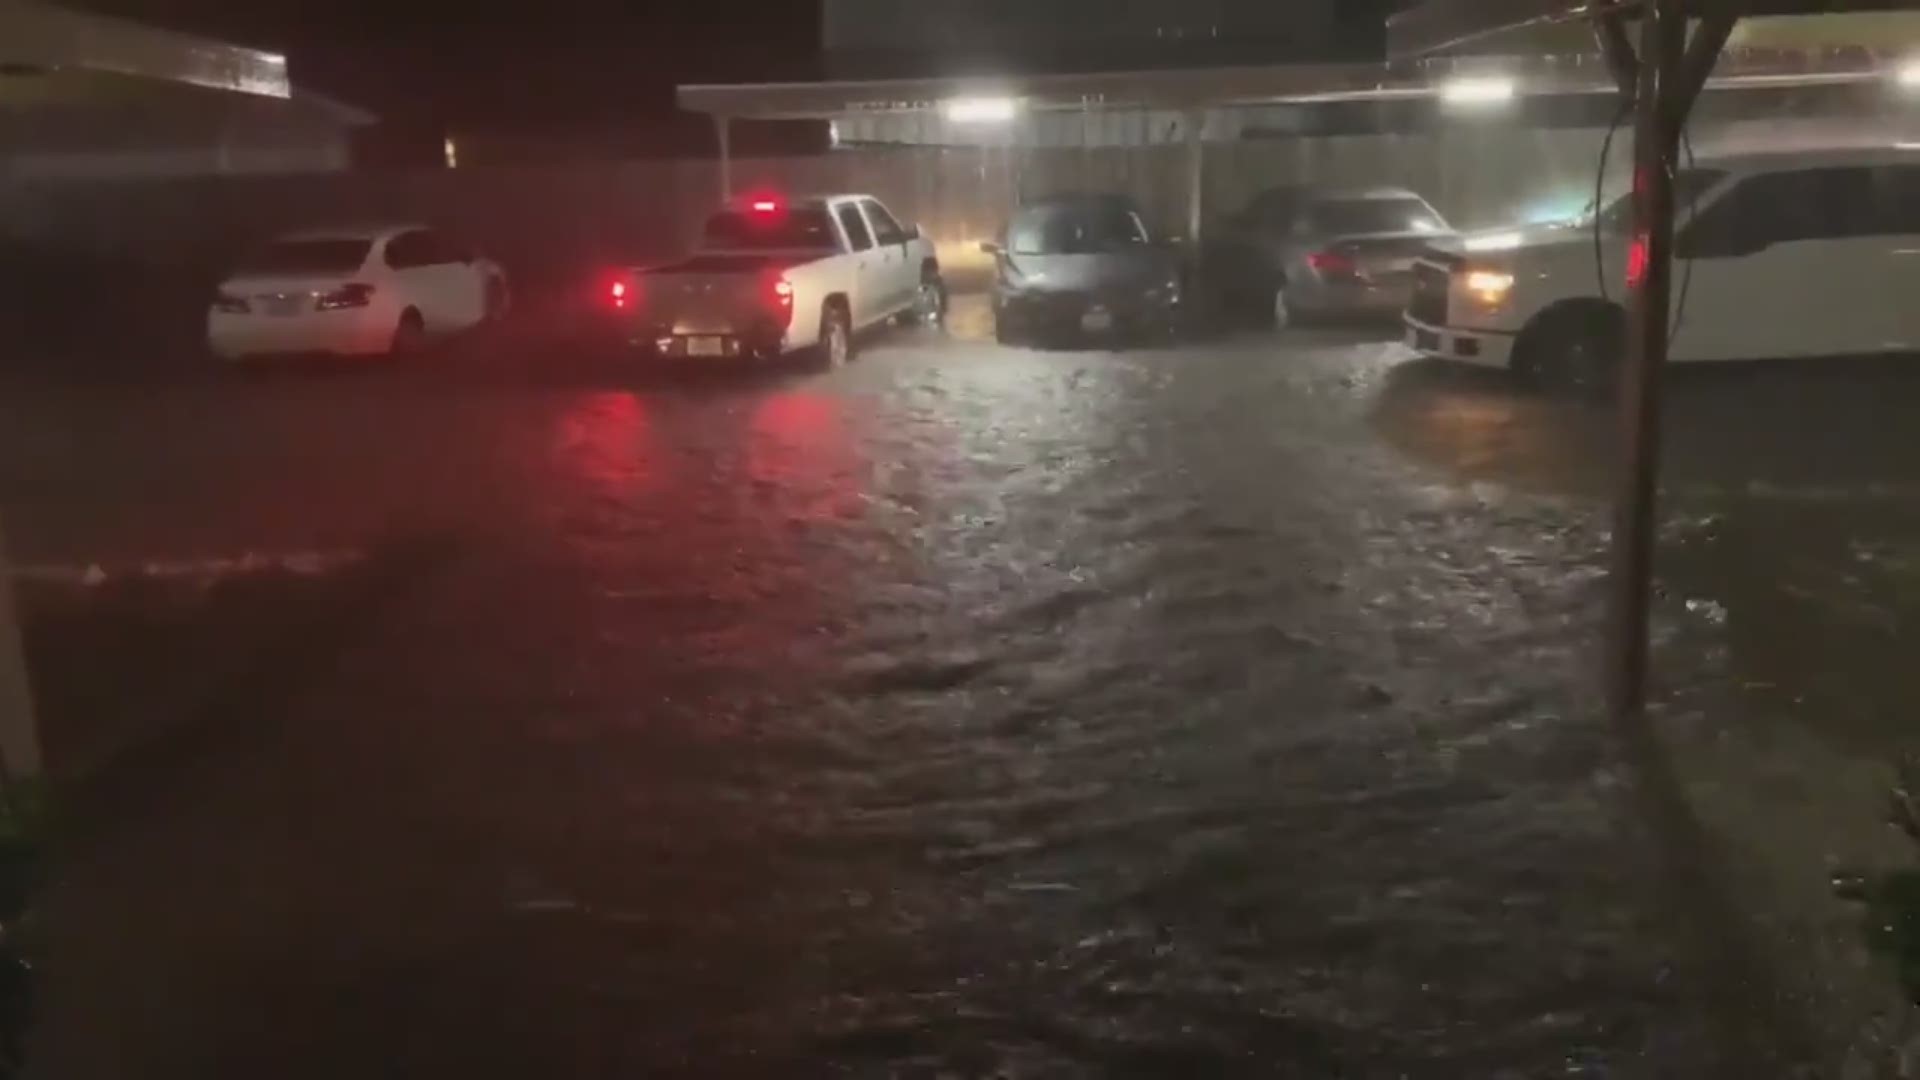 Jordan James captured the flooding in the parking lot at Settler's Cove Apartments in Beaumont on 9/18.